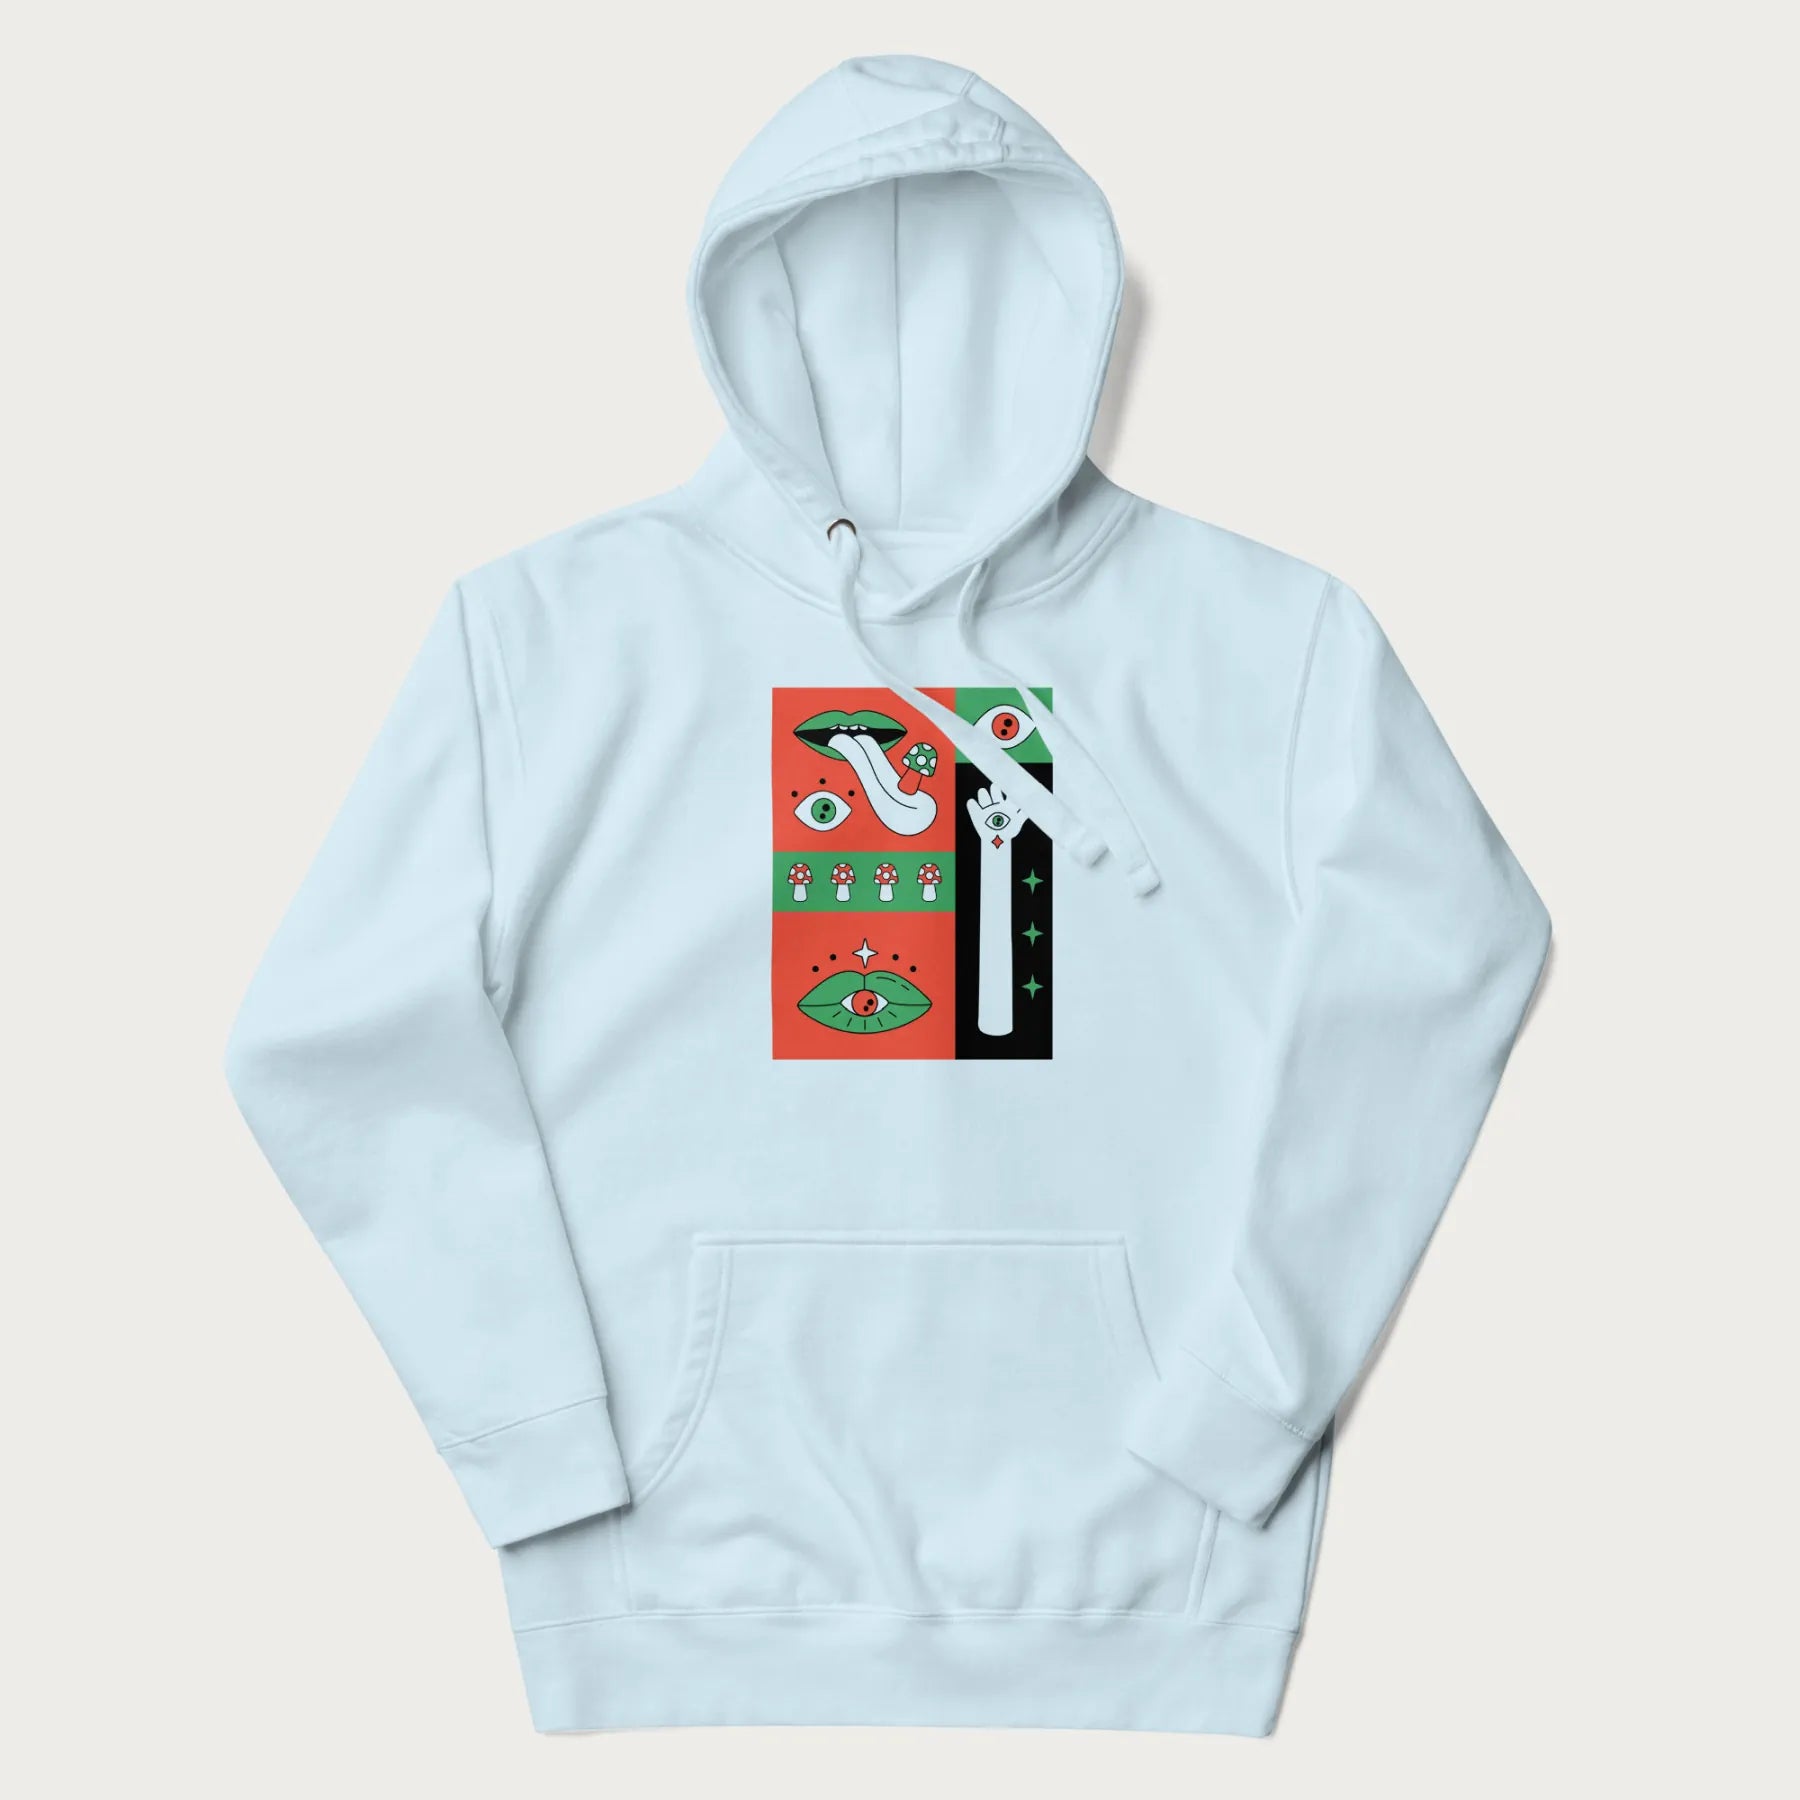 Light blue hoodie with mushroom psychedelic designs of surreal elements like lips, eyes, and mushrooms.